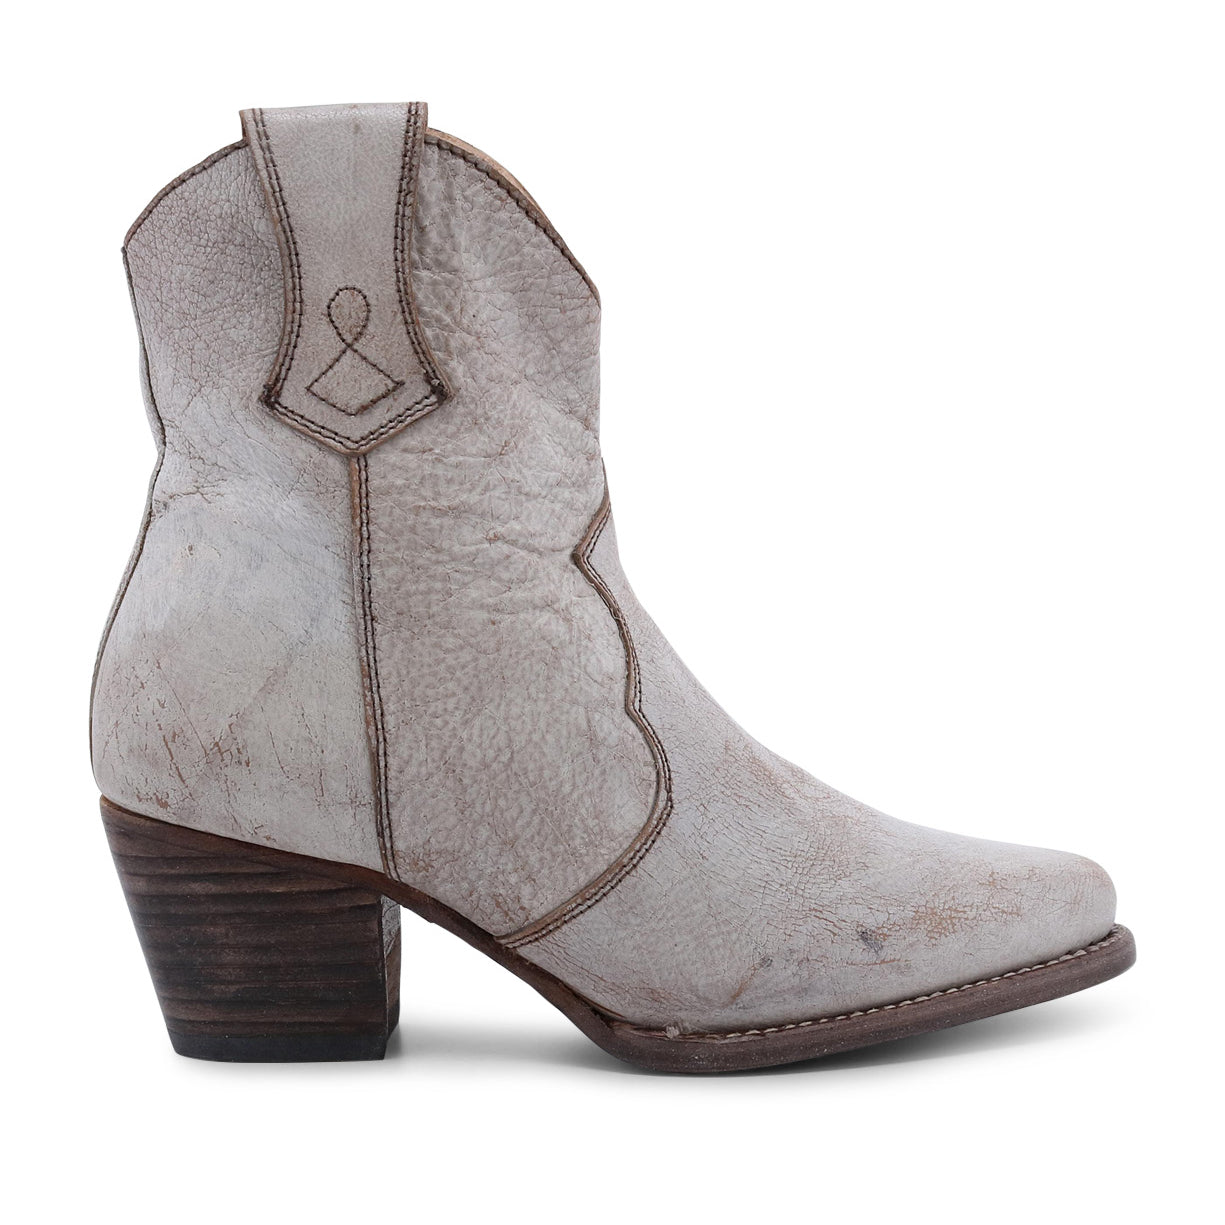 A women's grey Baila cowboy boot with a wooden heel from Oak Tree Farms.